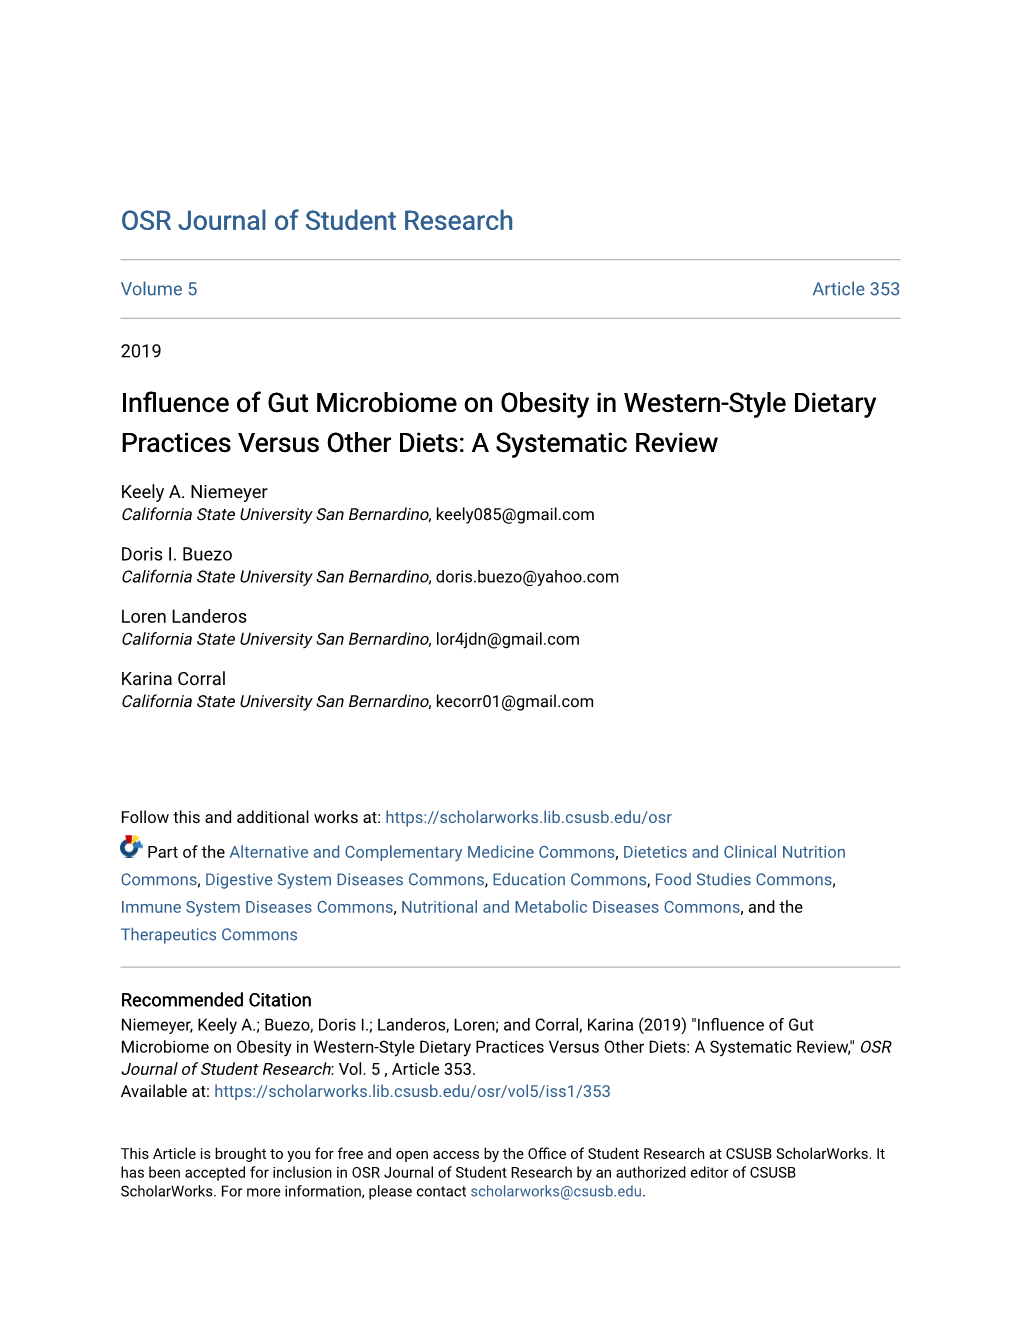 Influence of Gut Microbiome on Obesity in Western-Style Dietary Practices Versus Other Diets: a Systematic Review